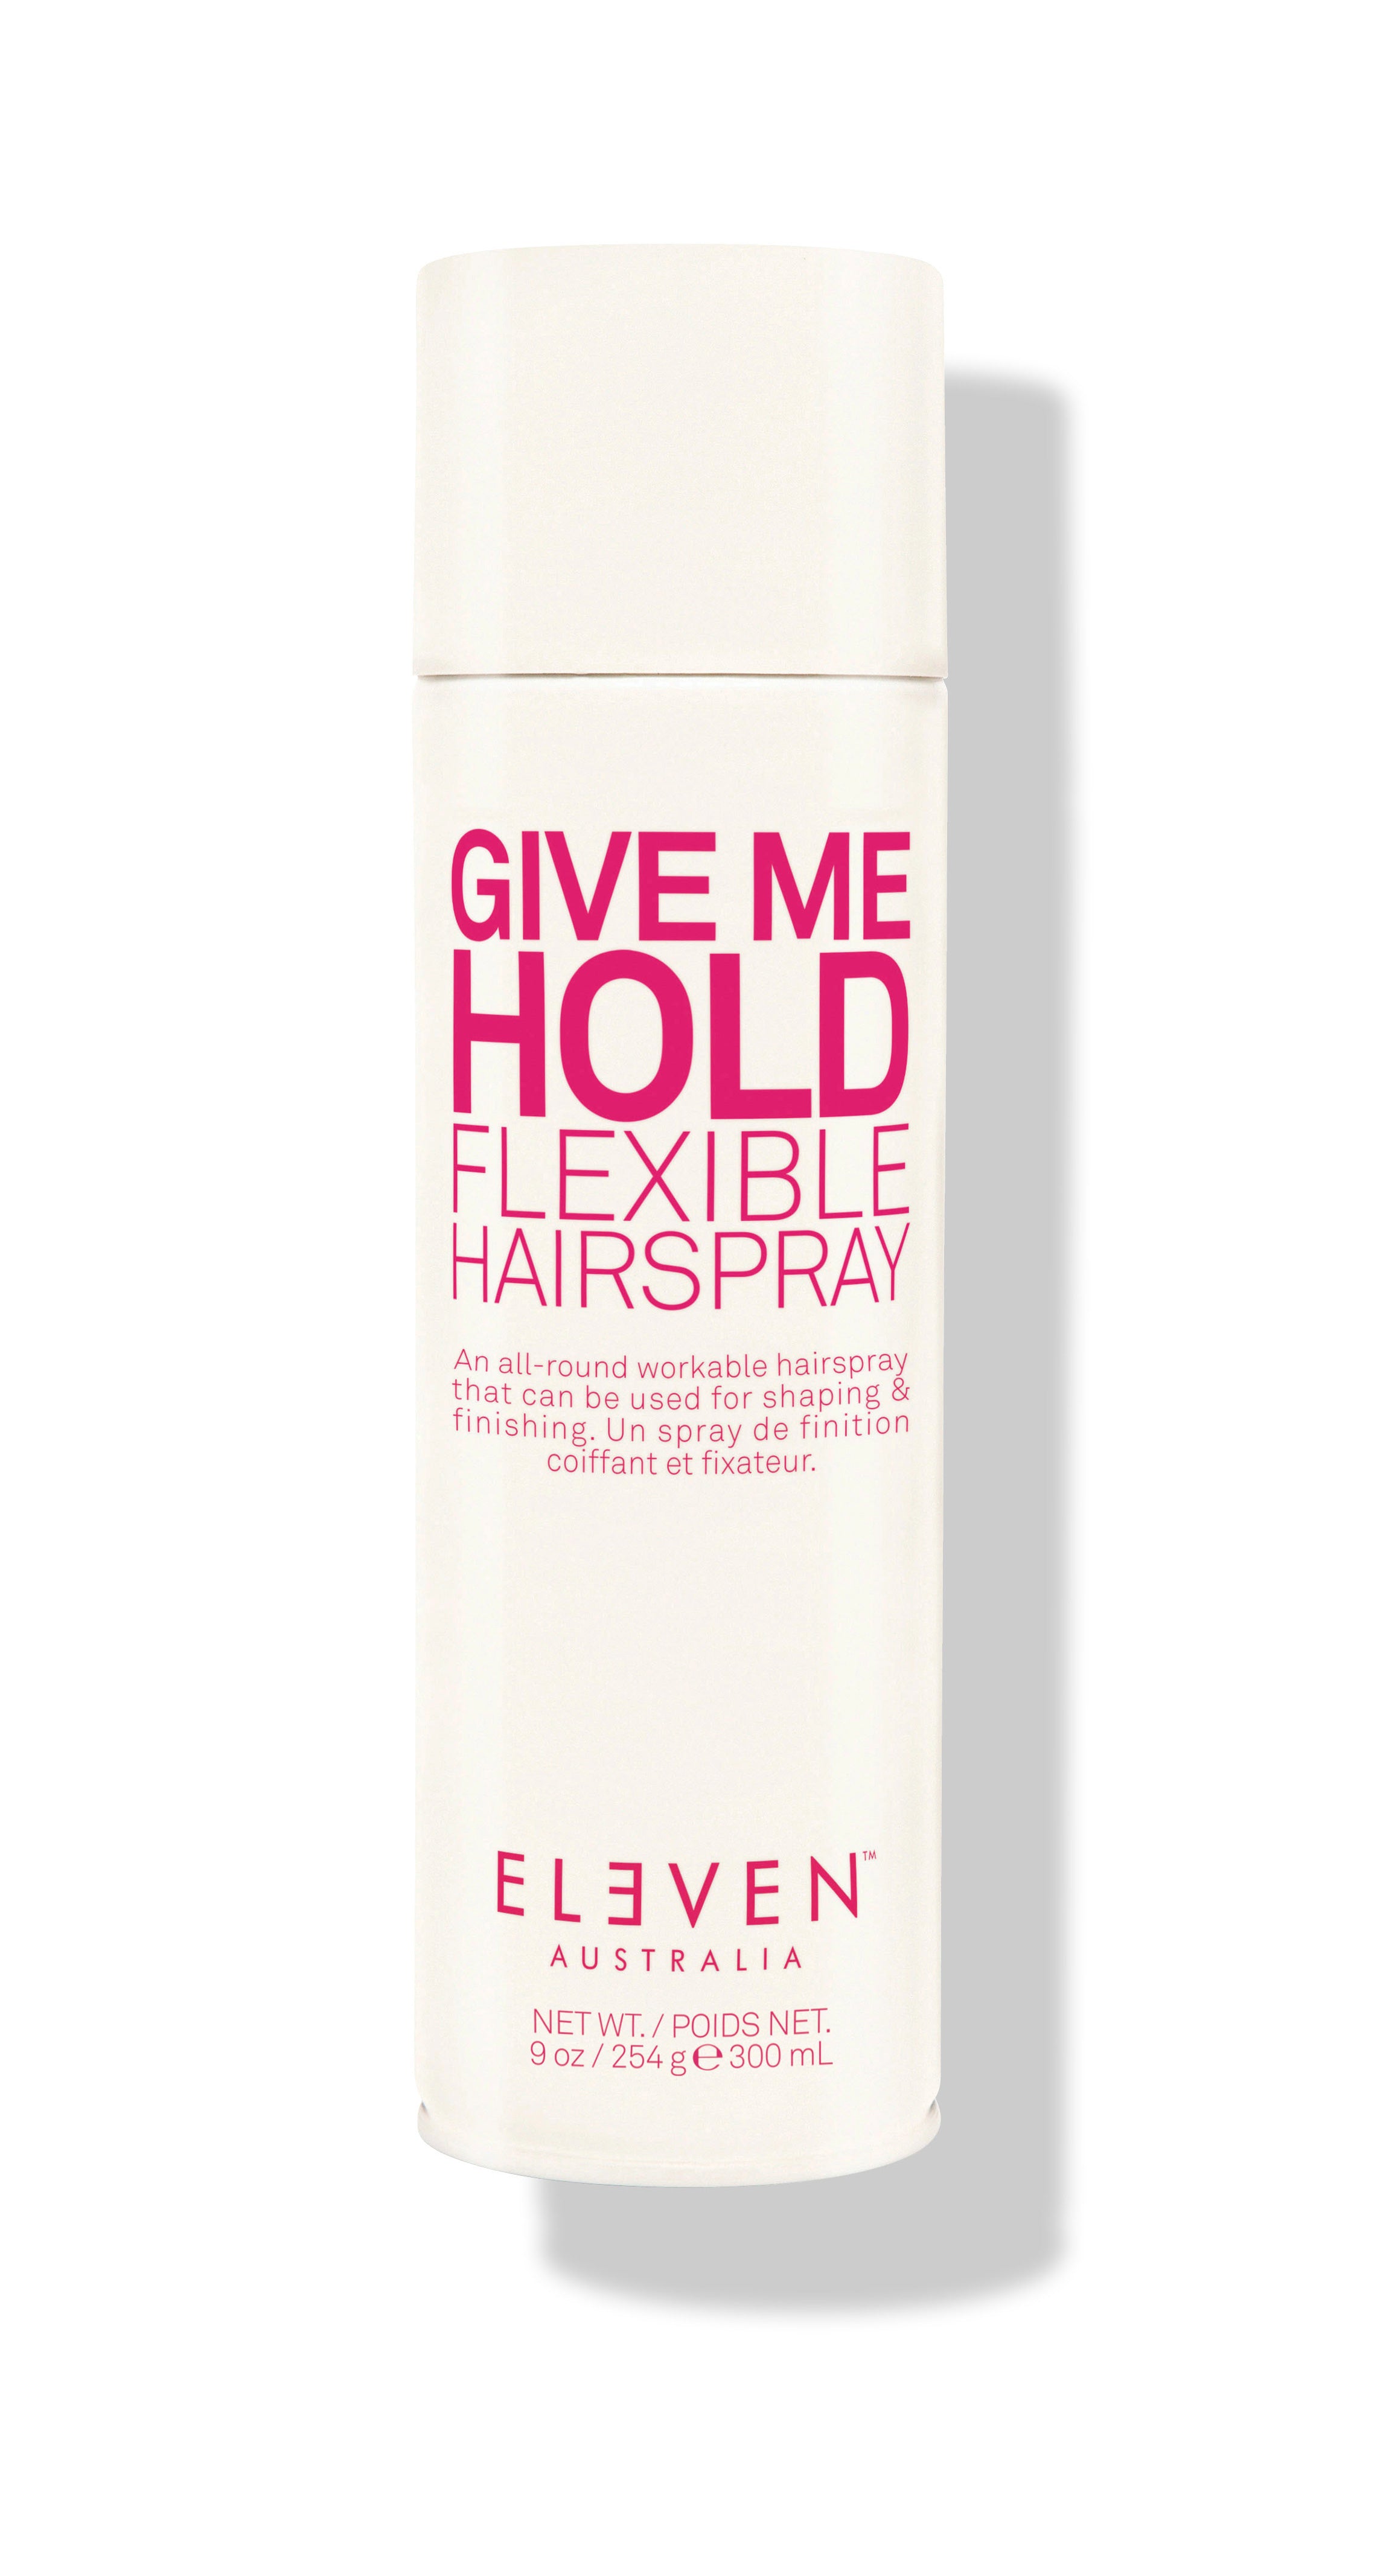 GIVE ME HOLD FLEXIBLE HAIRSPRAY 9 OZ